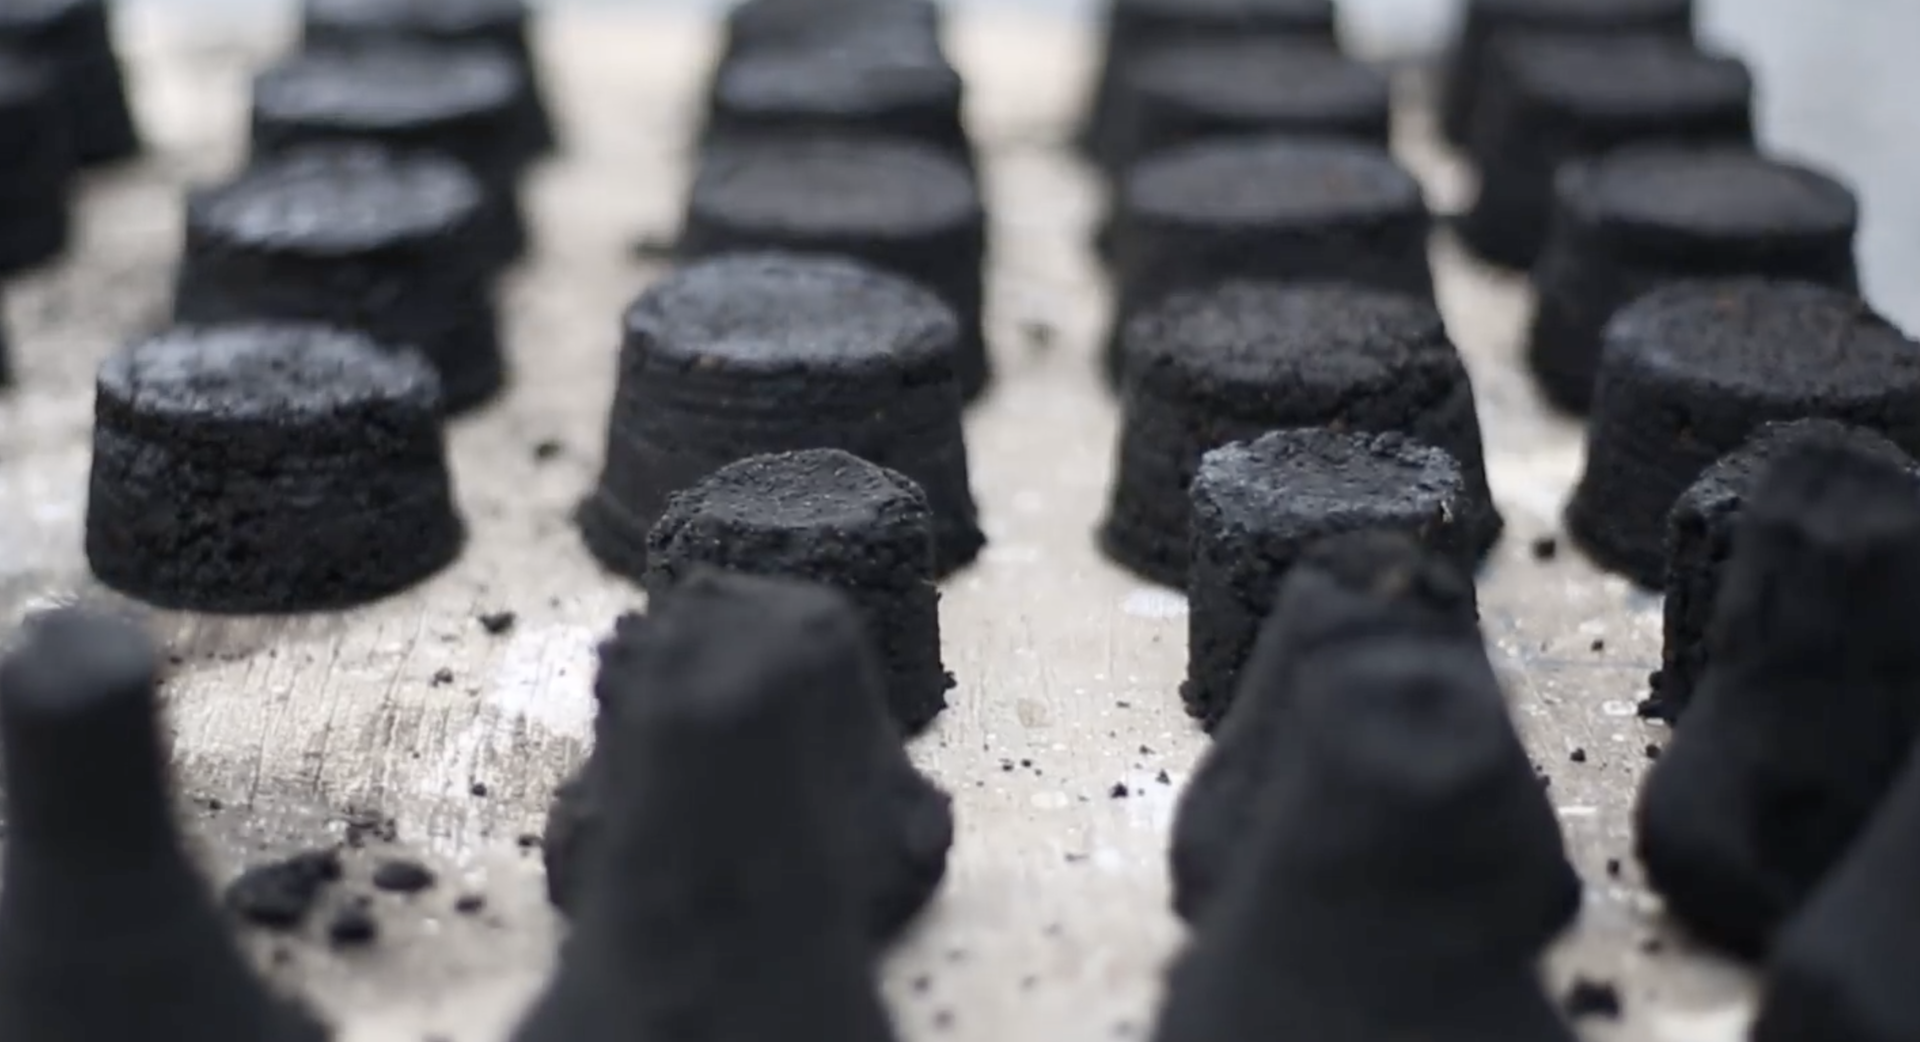 The finished product - charcoal made from human waste, plus polymer and Cassava flour.